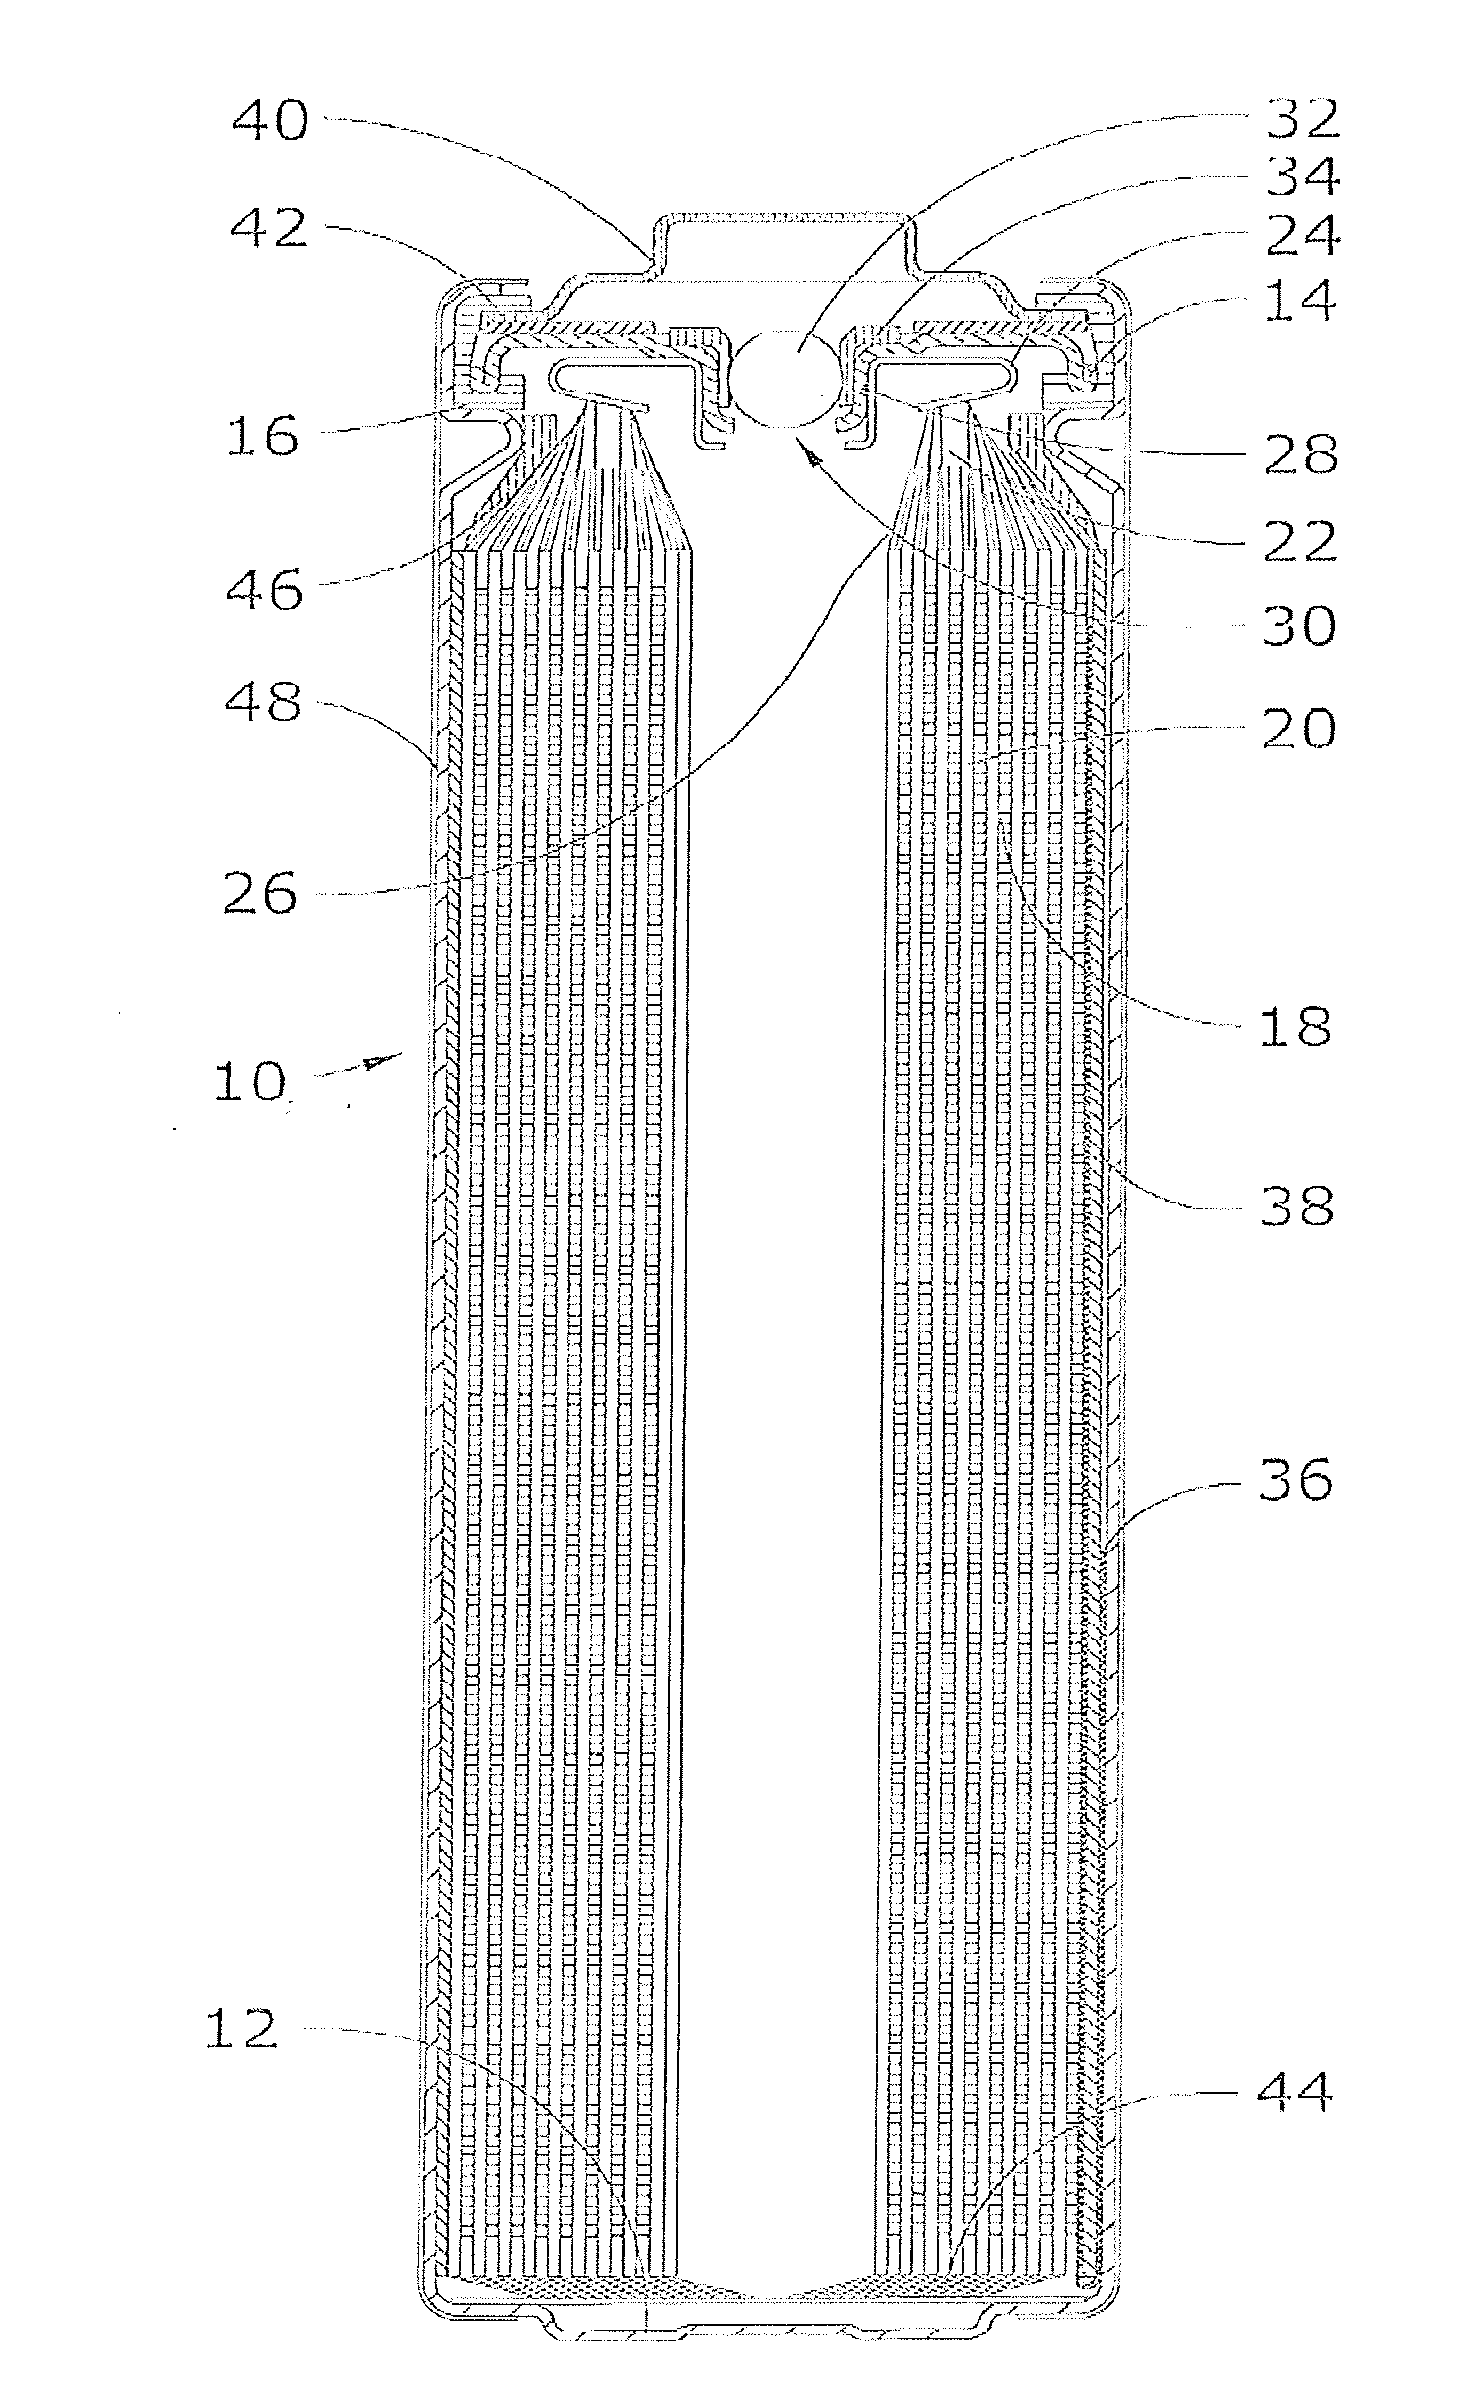 Lithium-Iron Disulfide Cell Design with Core Reinforcement